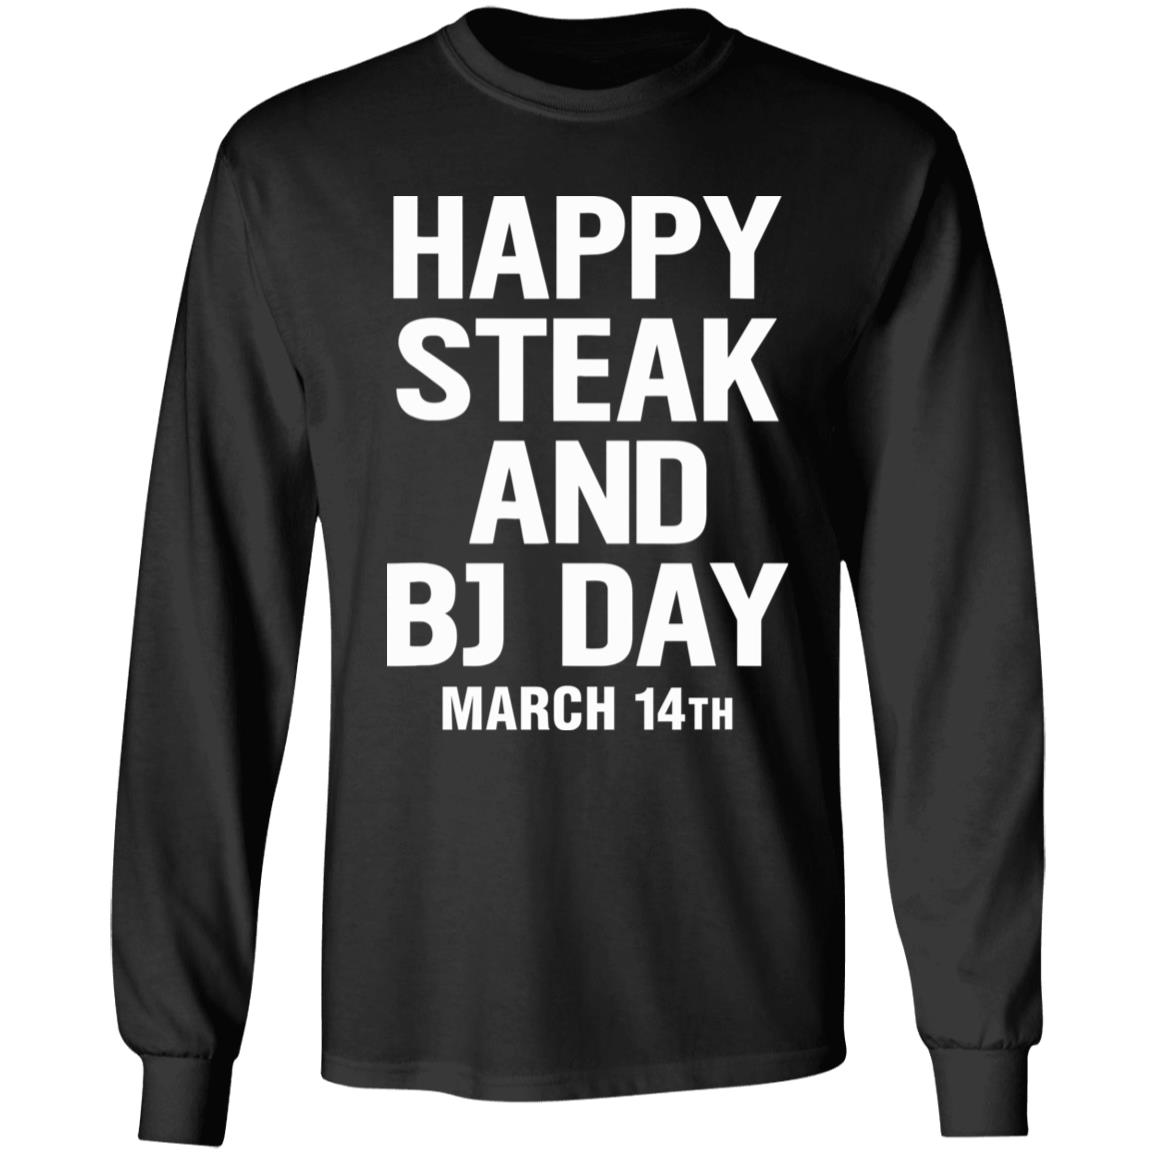 ananya mohanty recommends National Steak And Blow Job Day